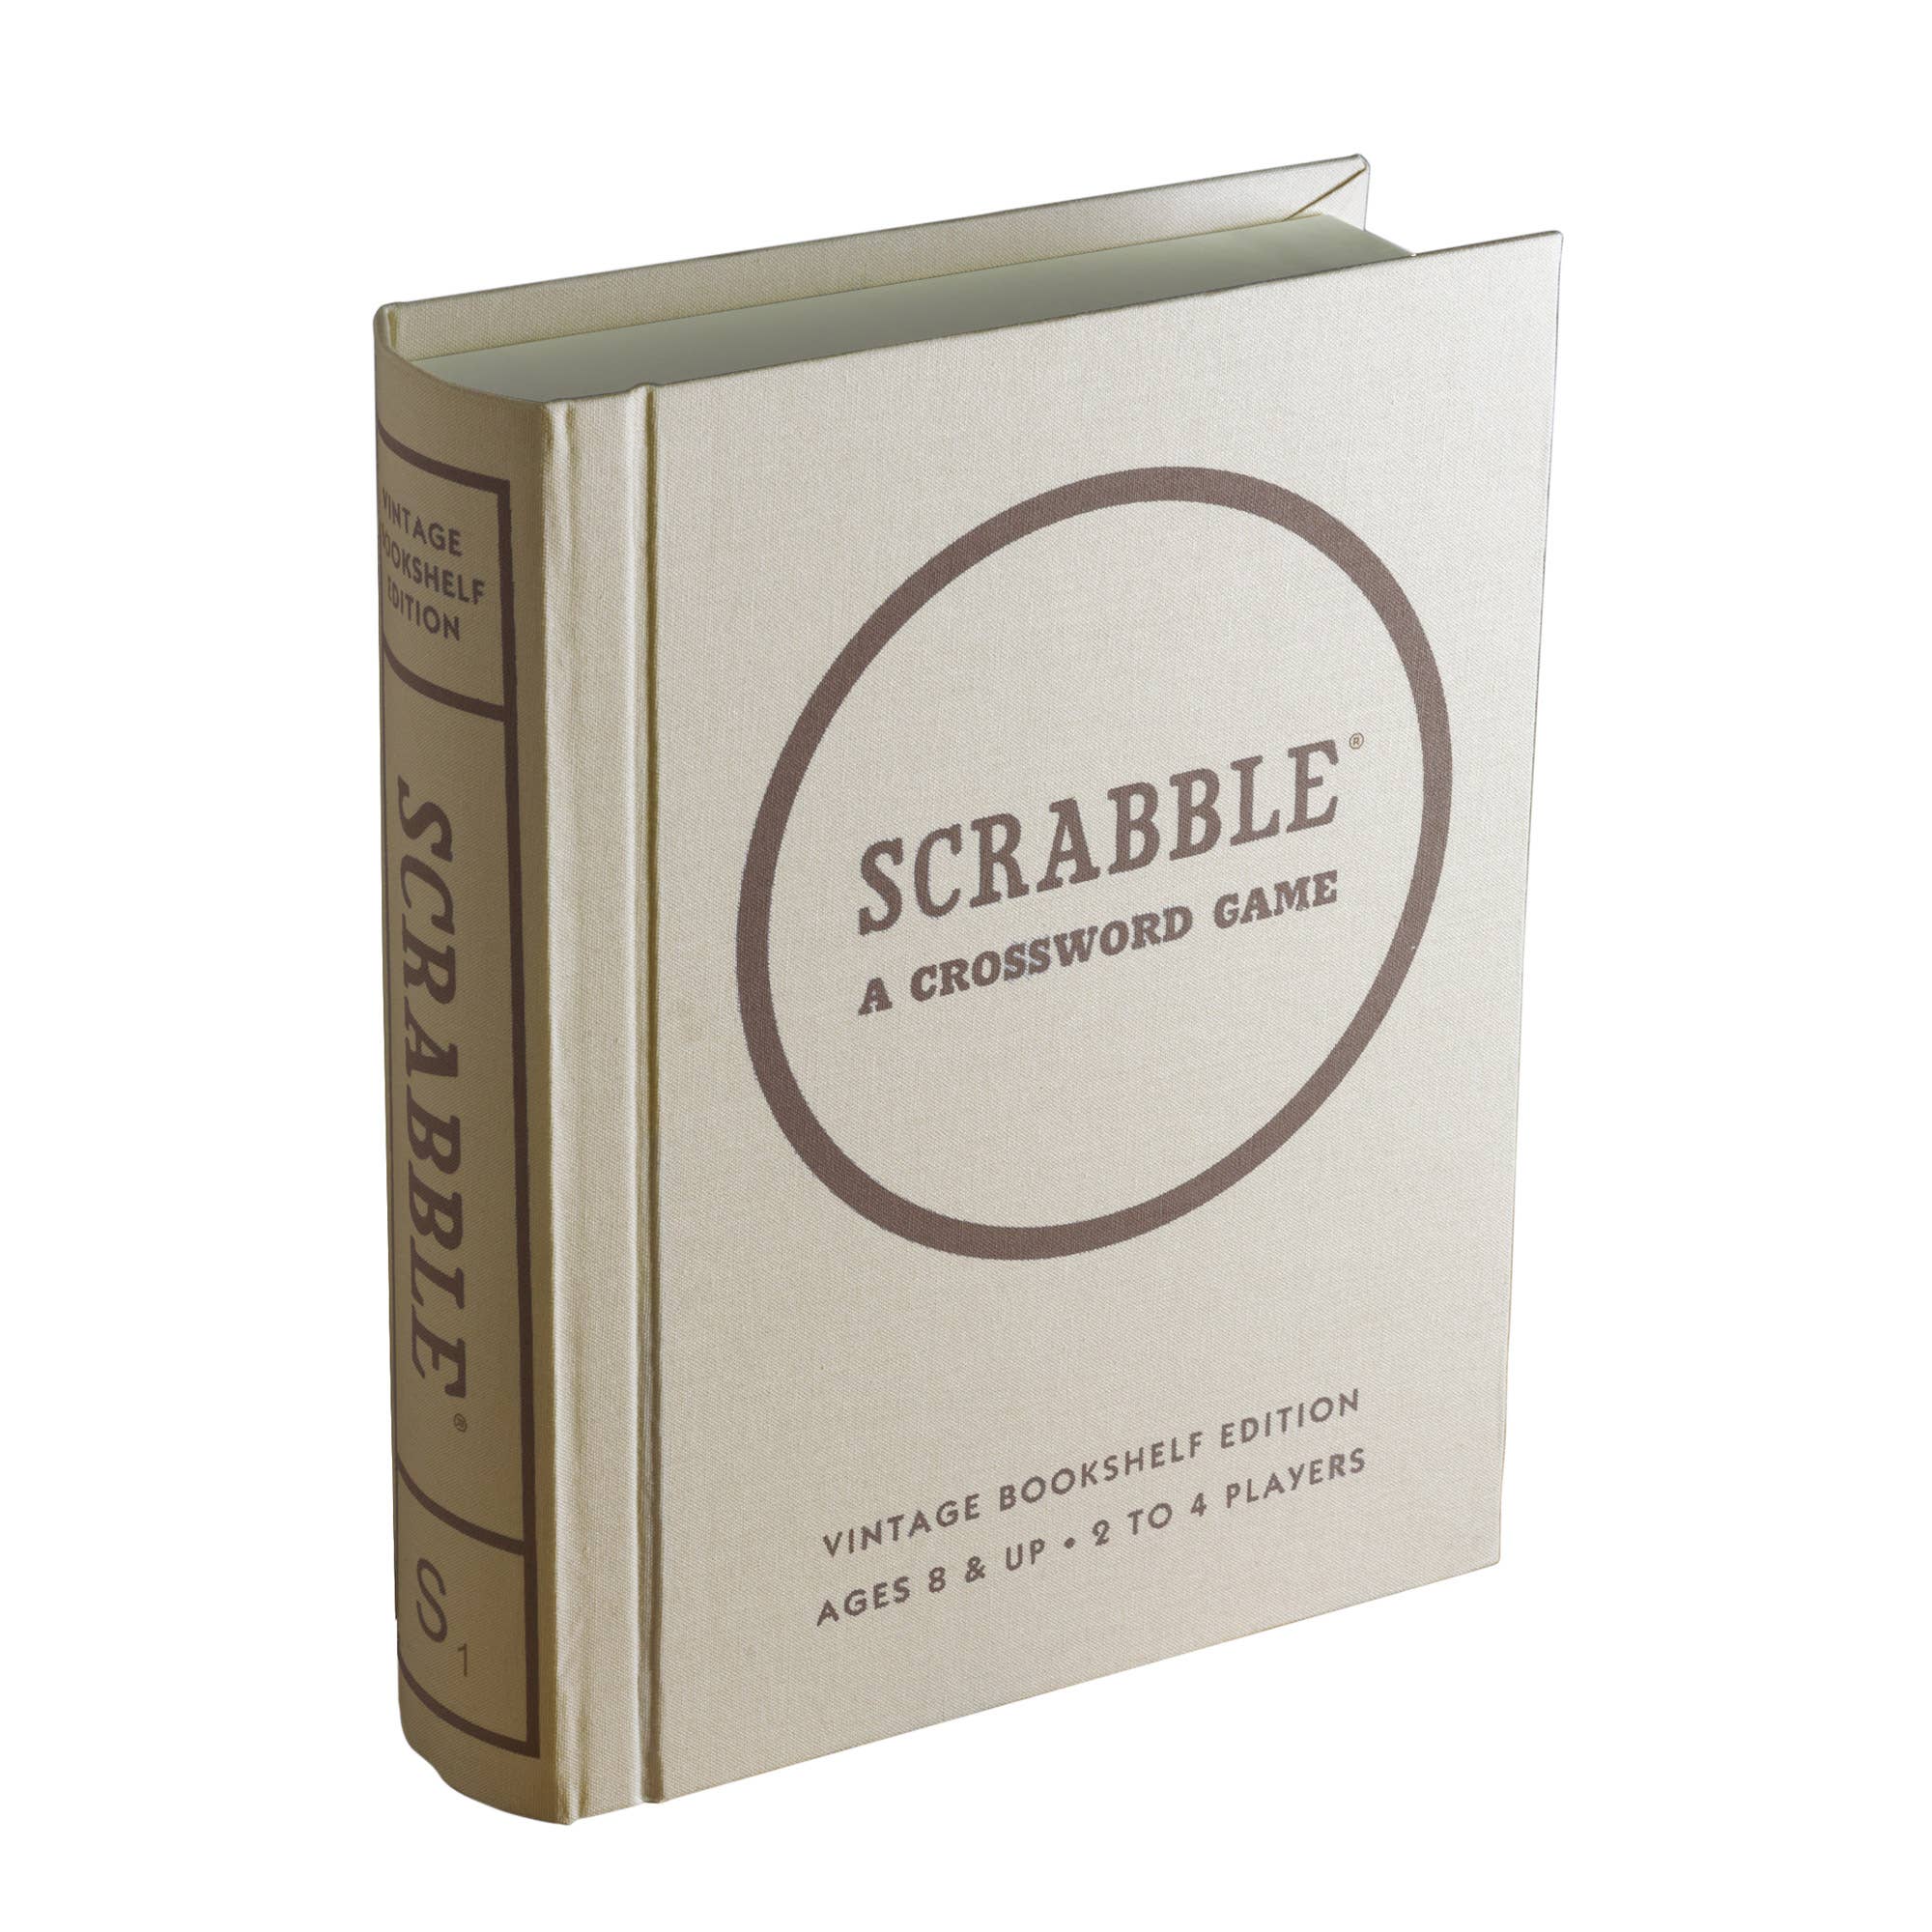 WS Game Company - WS Game Company Scrabble Vintage Bookshelf Edition - Bards & Cards